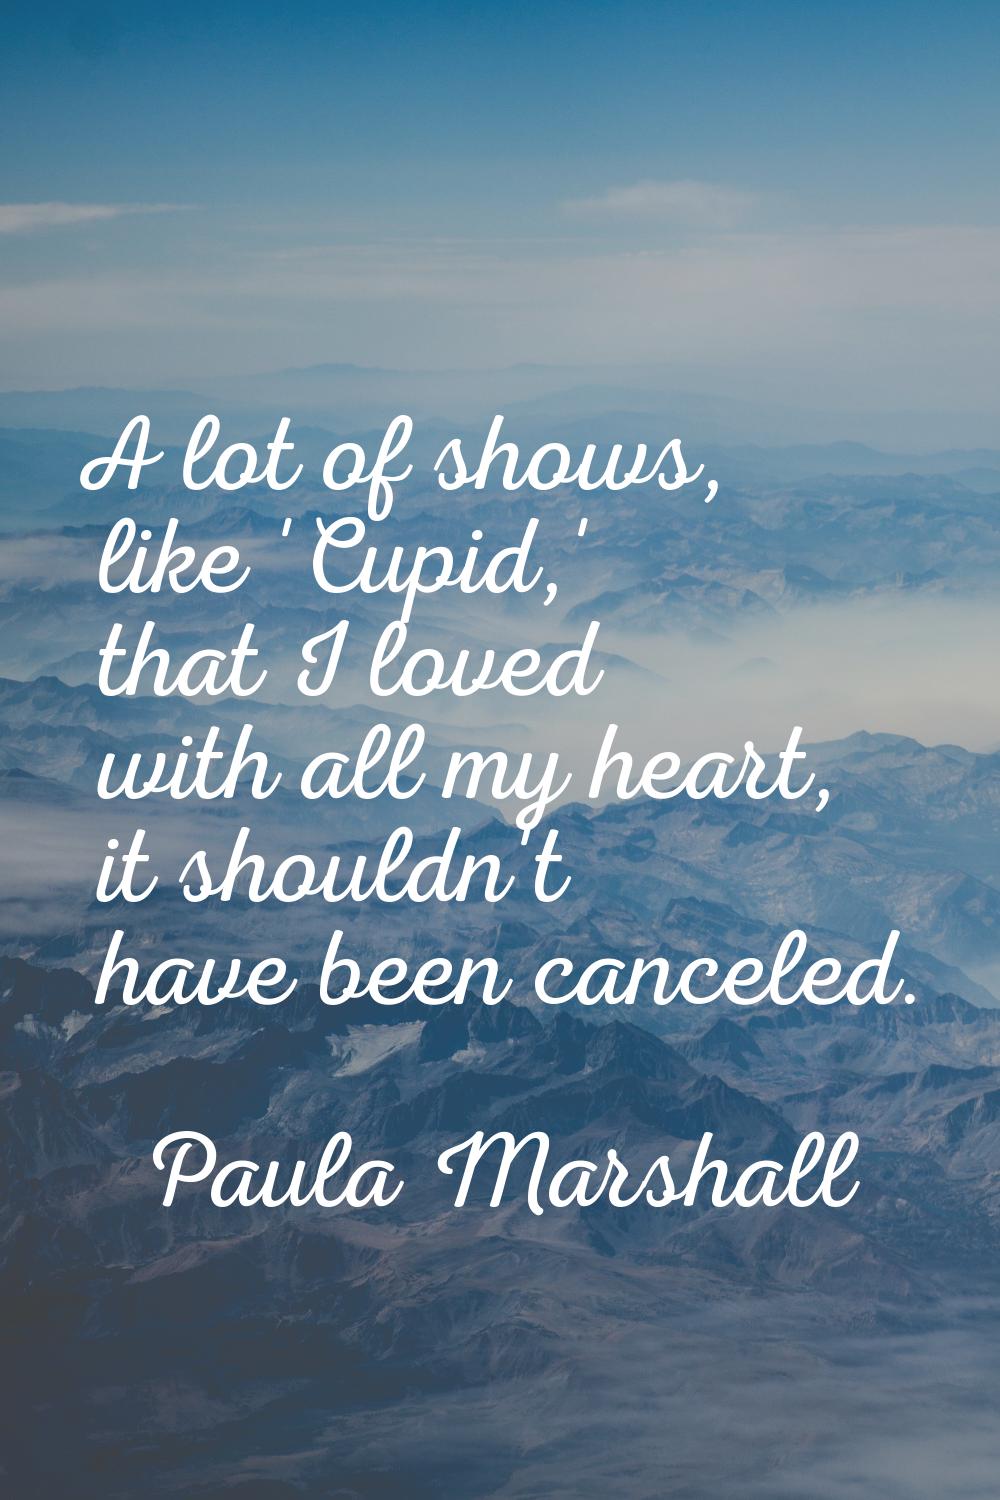 A lot of shows, like 'Cupid,' that I loved with all my heart, it shouldn't have been canceled.